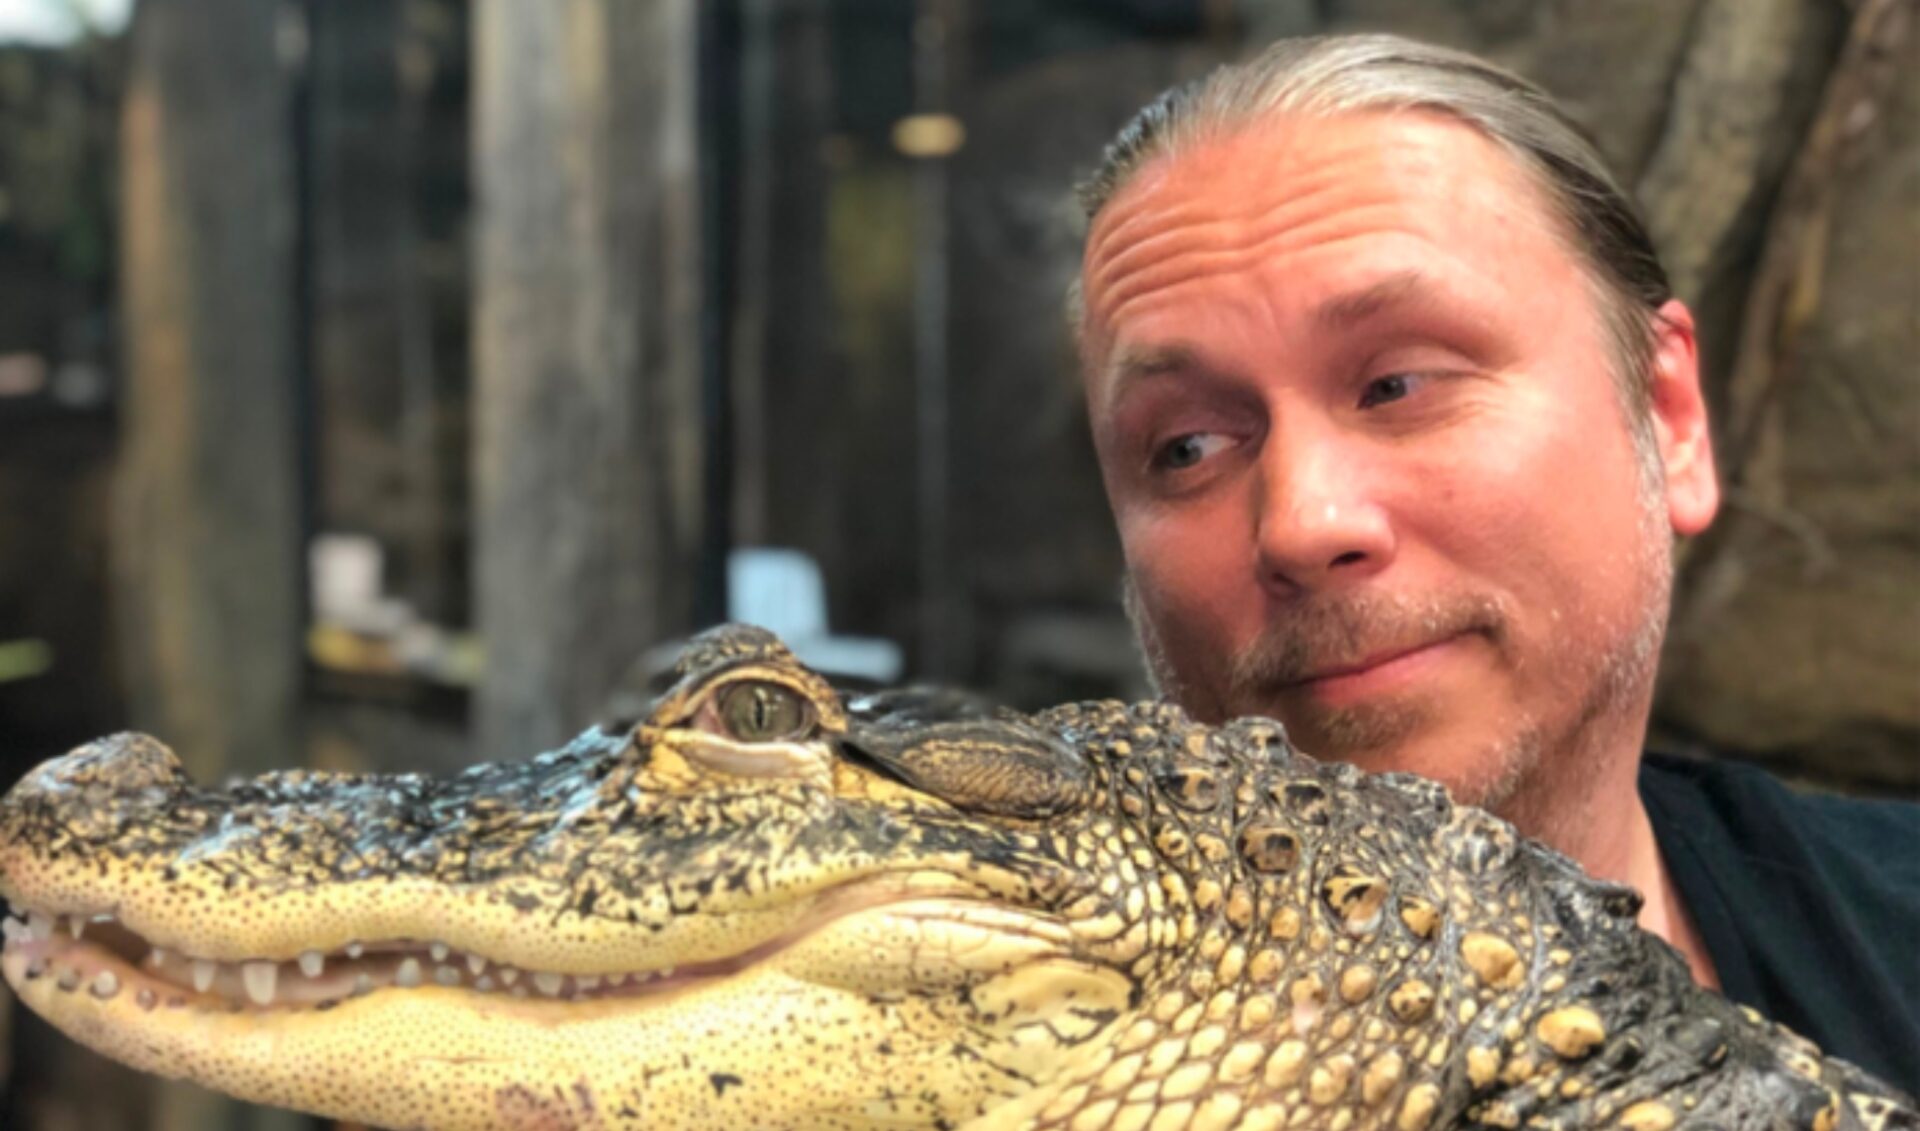 Brian Barczyk, who helped millions learn to love reptiles, has died